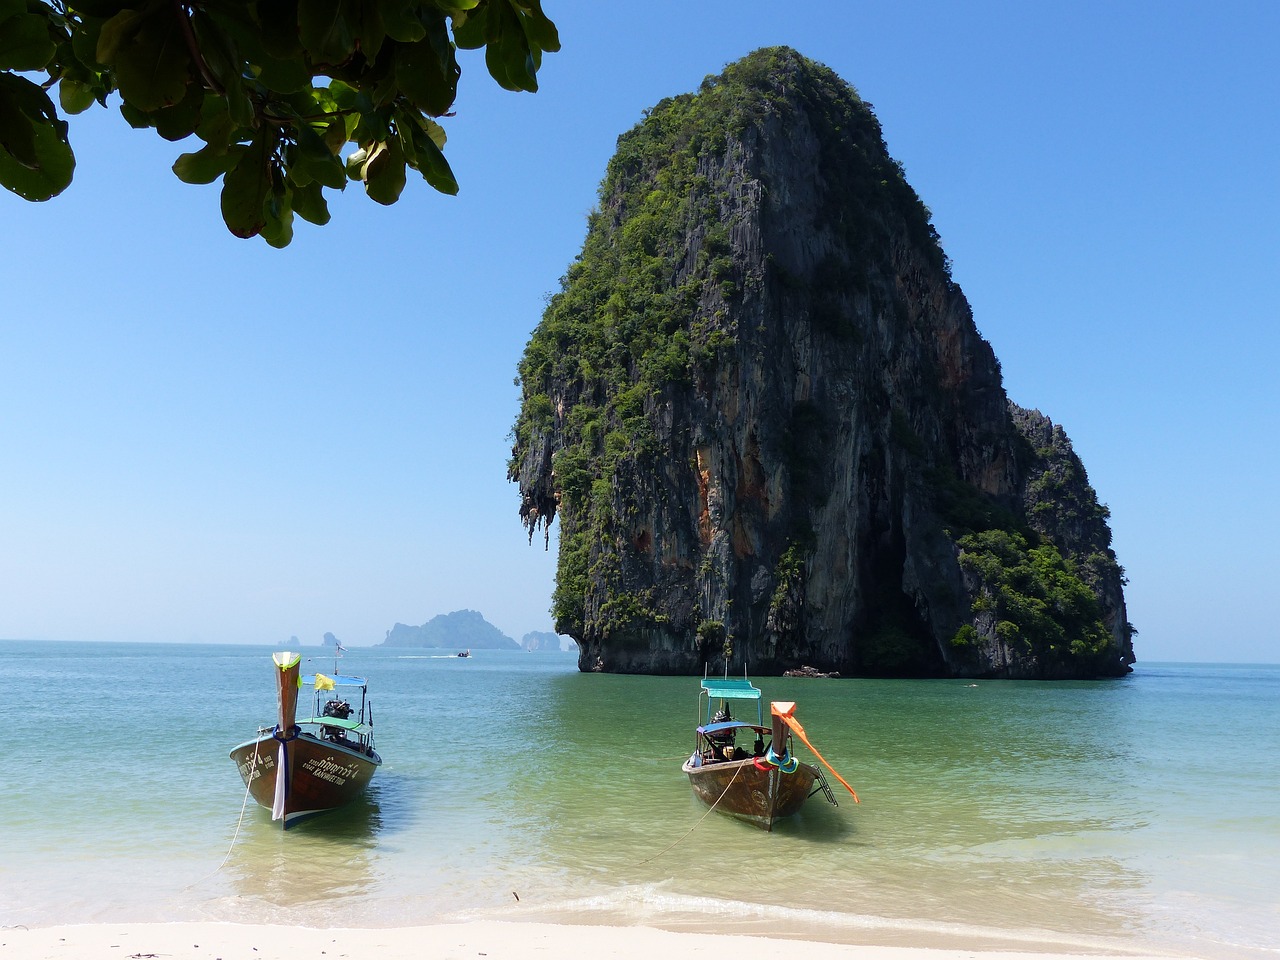 Krabi Island Adventure: 3-Day Itinerary with Island Hopping, Elephant Encounters, and Local Cuisine